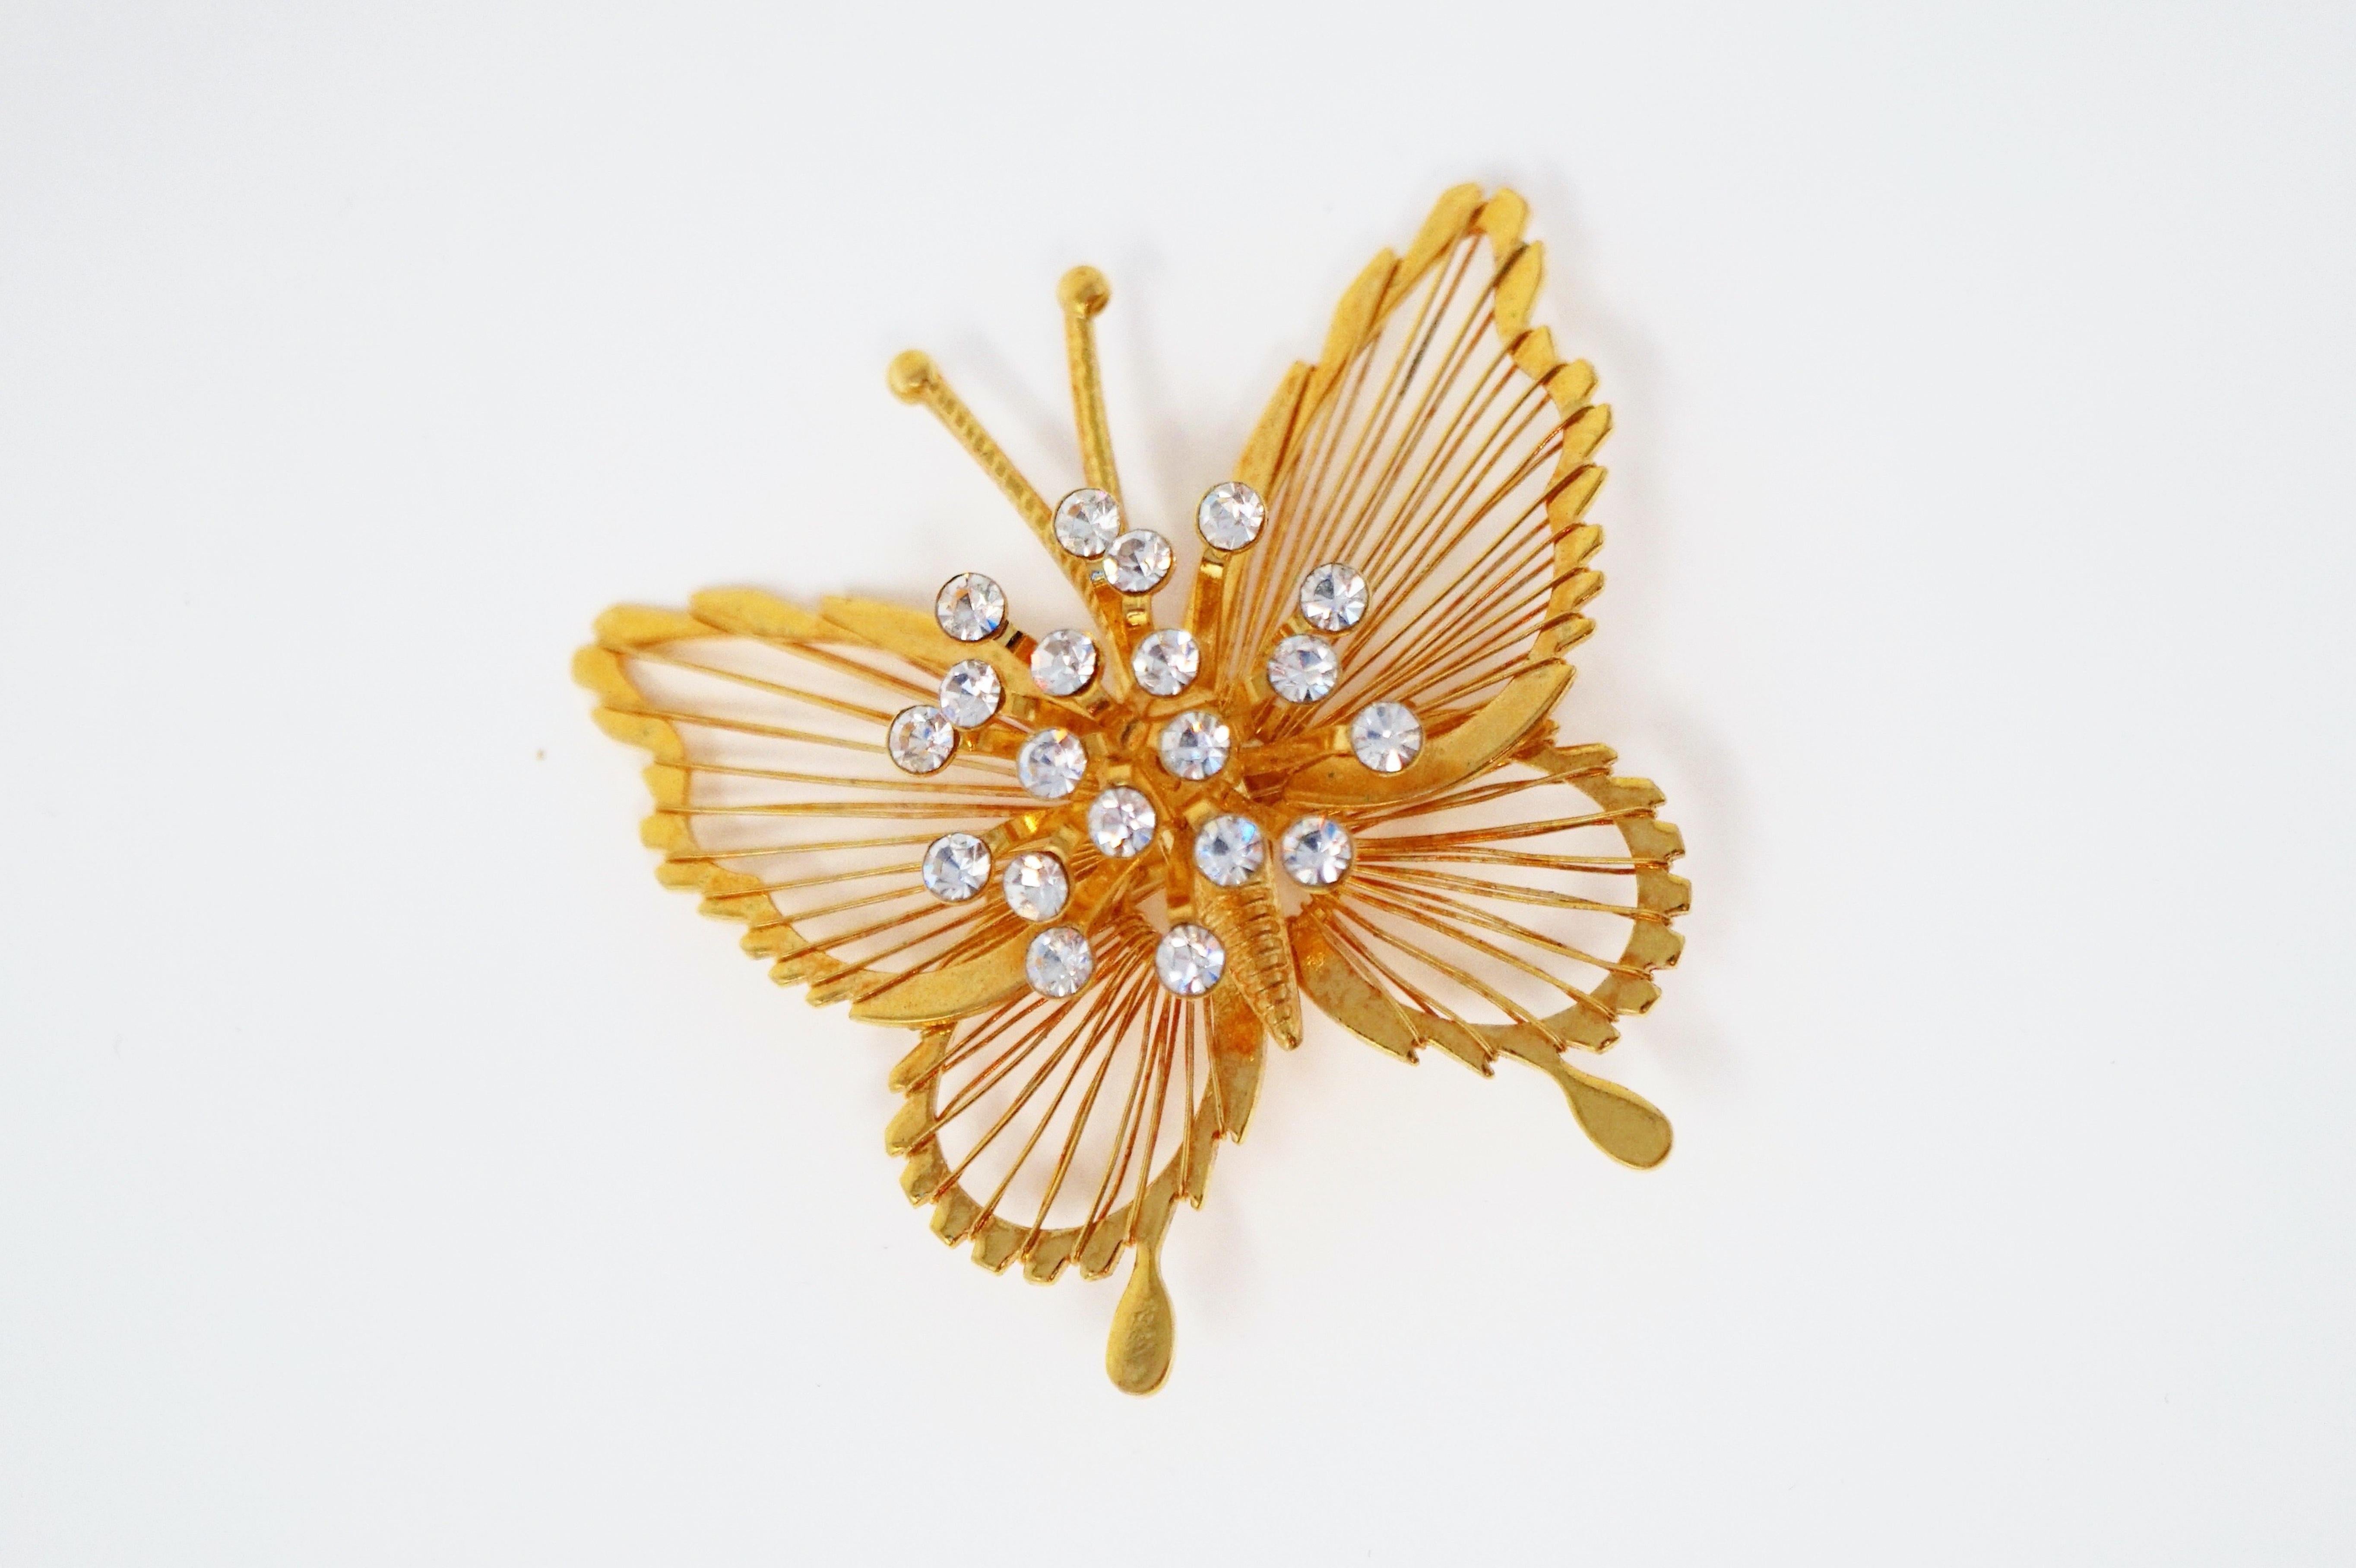 This gorgeous gilt butterfly brooch by Monet, circa 1970s, is a wonderful example of the quality and innovative designs that the coveted vintage costume jewelry brand is known for. With a shiny gold-plated finish and crystal rhinestone spray detail,